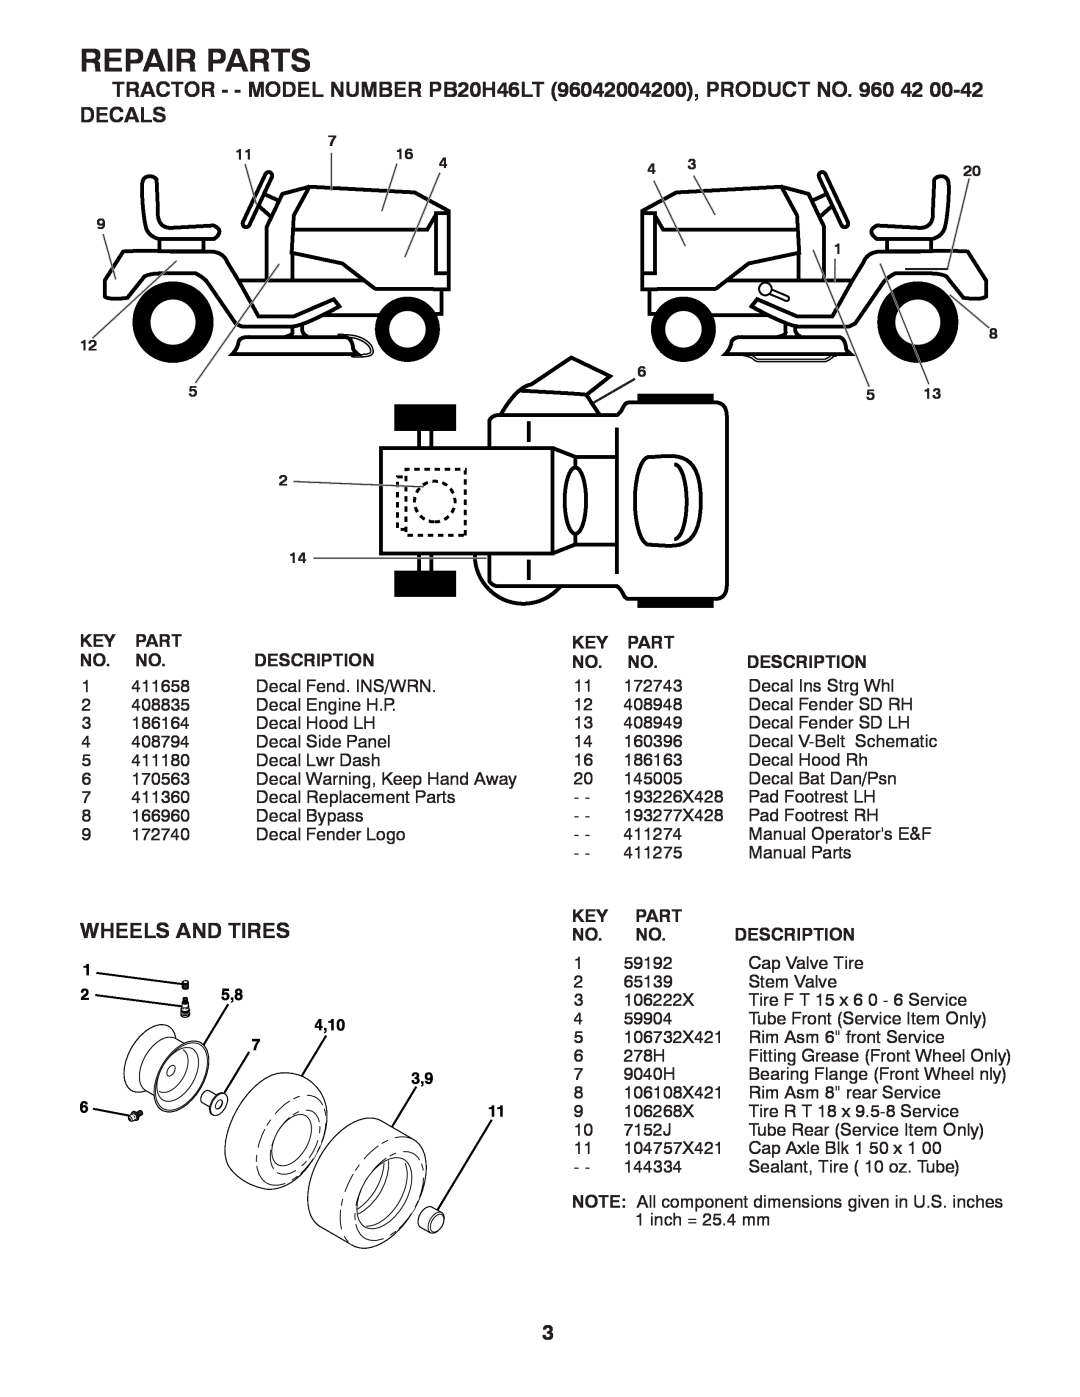 Poulan manual Decals, Wheels And Tires, Repair Parts, TRACTOR - - MODEL NUMBER PB20H46LT 96042004200, PRODUCT NO. 960 